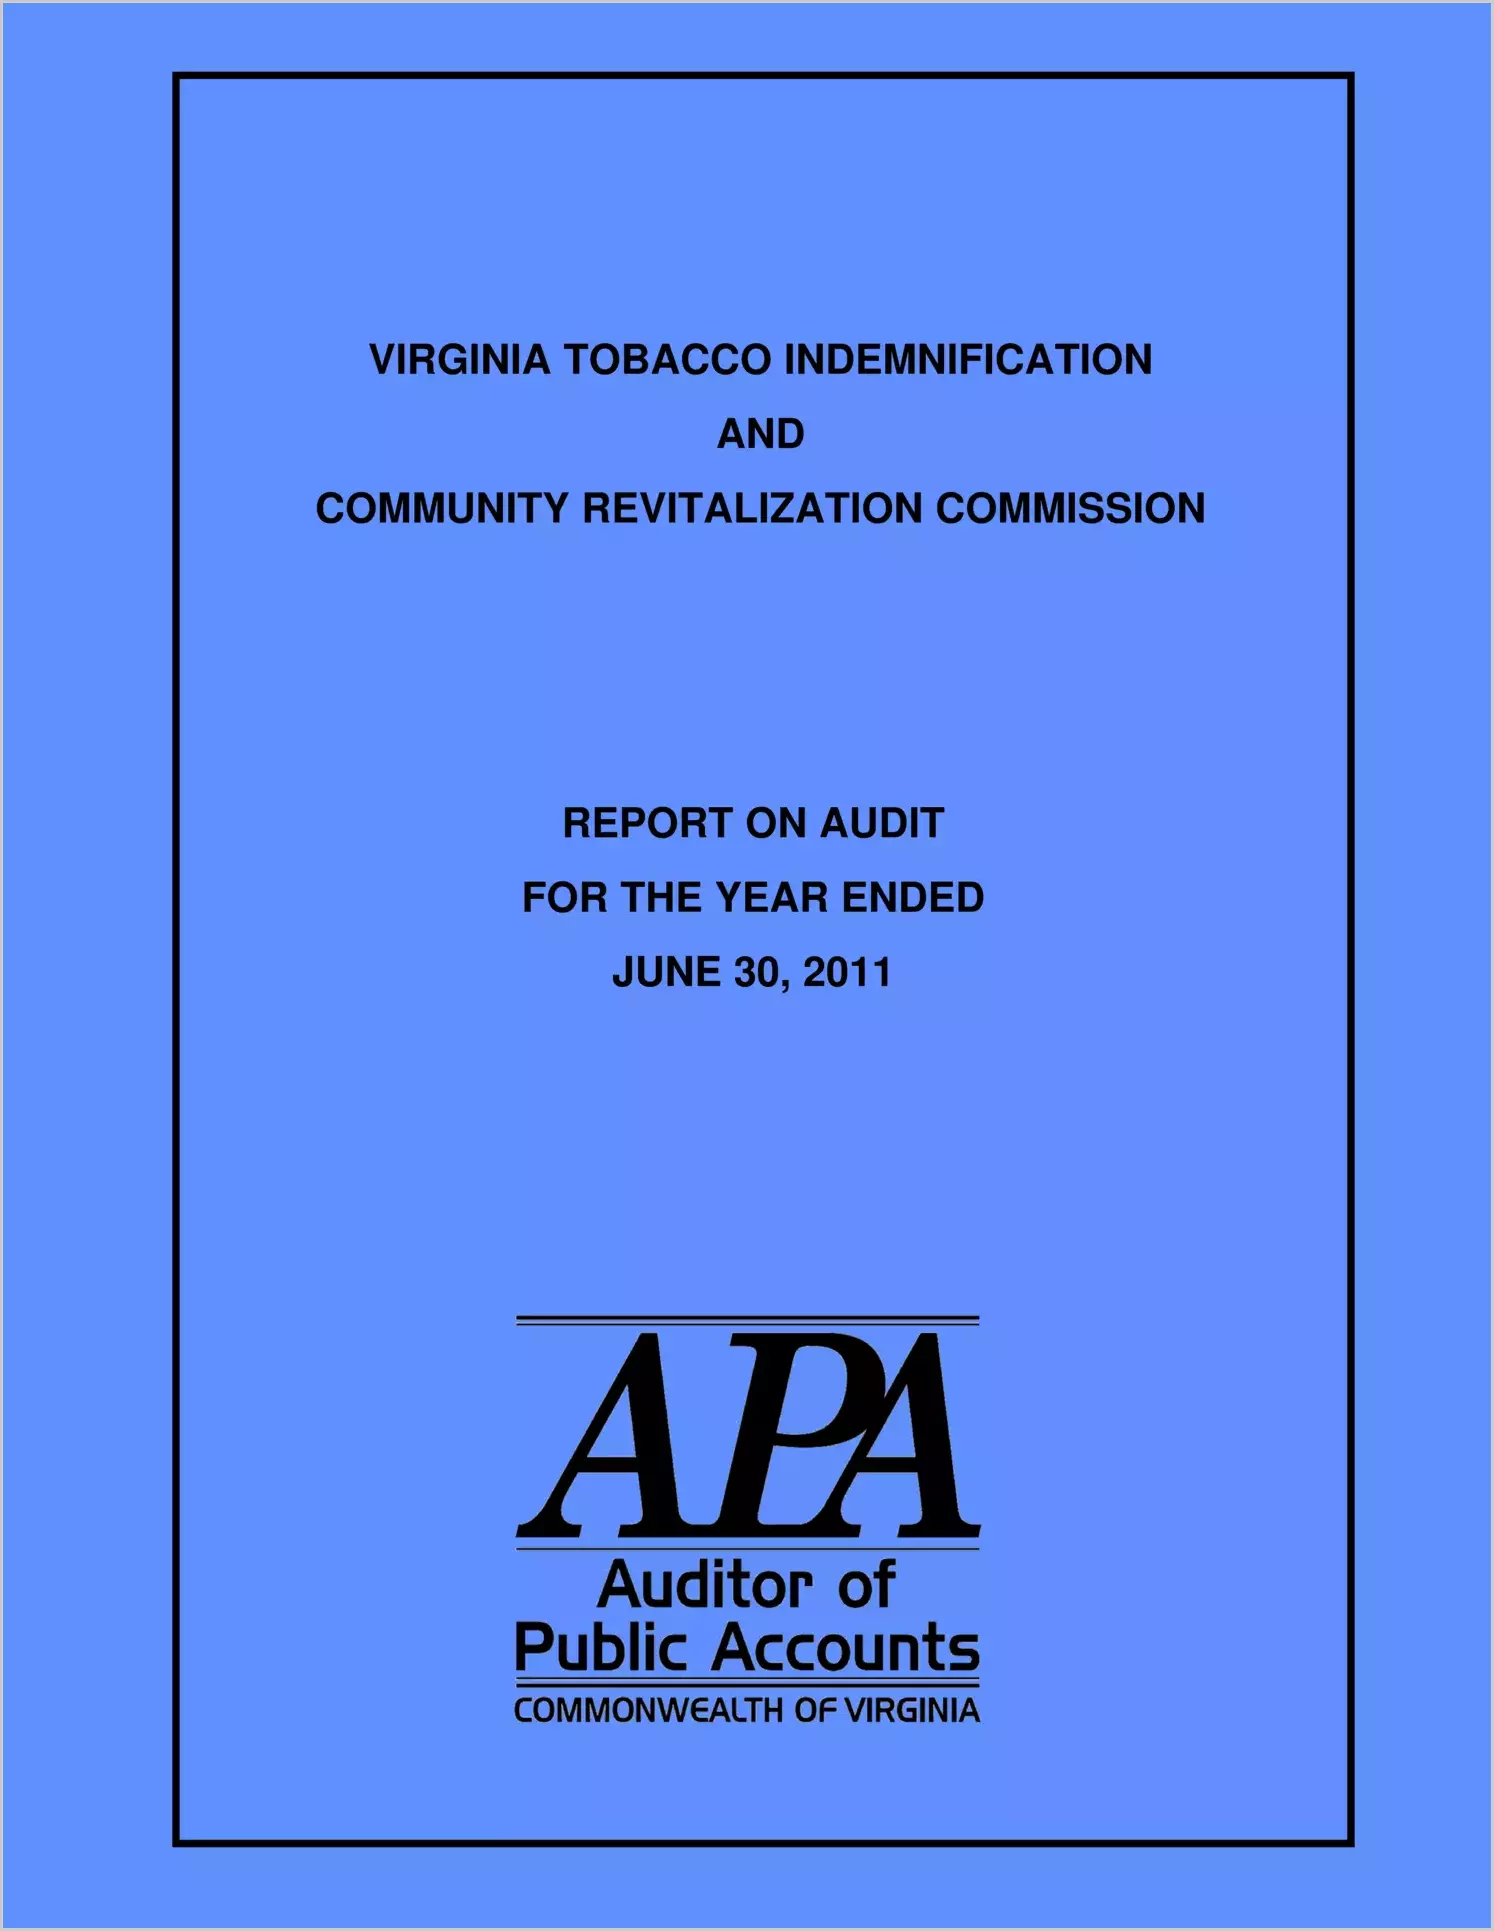 Tobacco Indemnification and Community Revitalization Commission for the year ended June 30, 2011